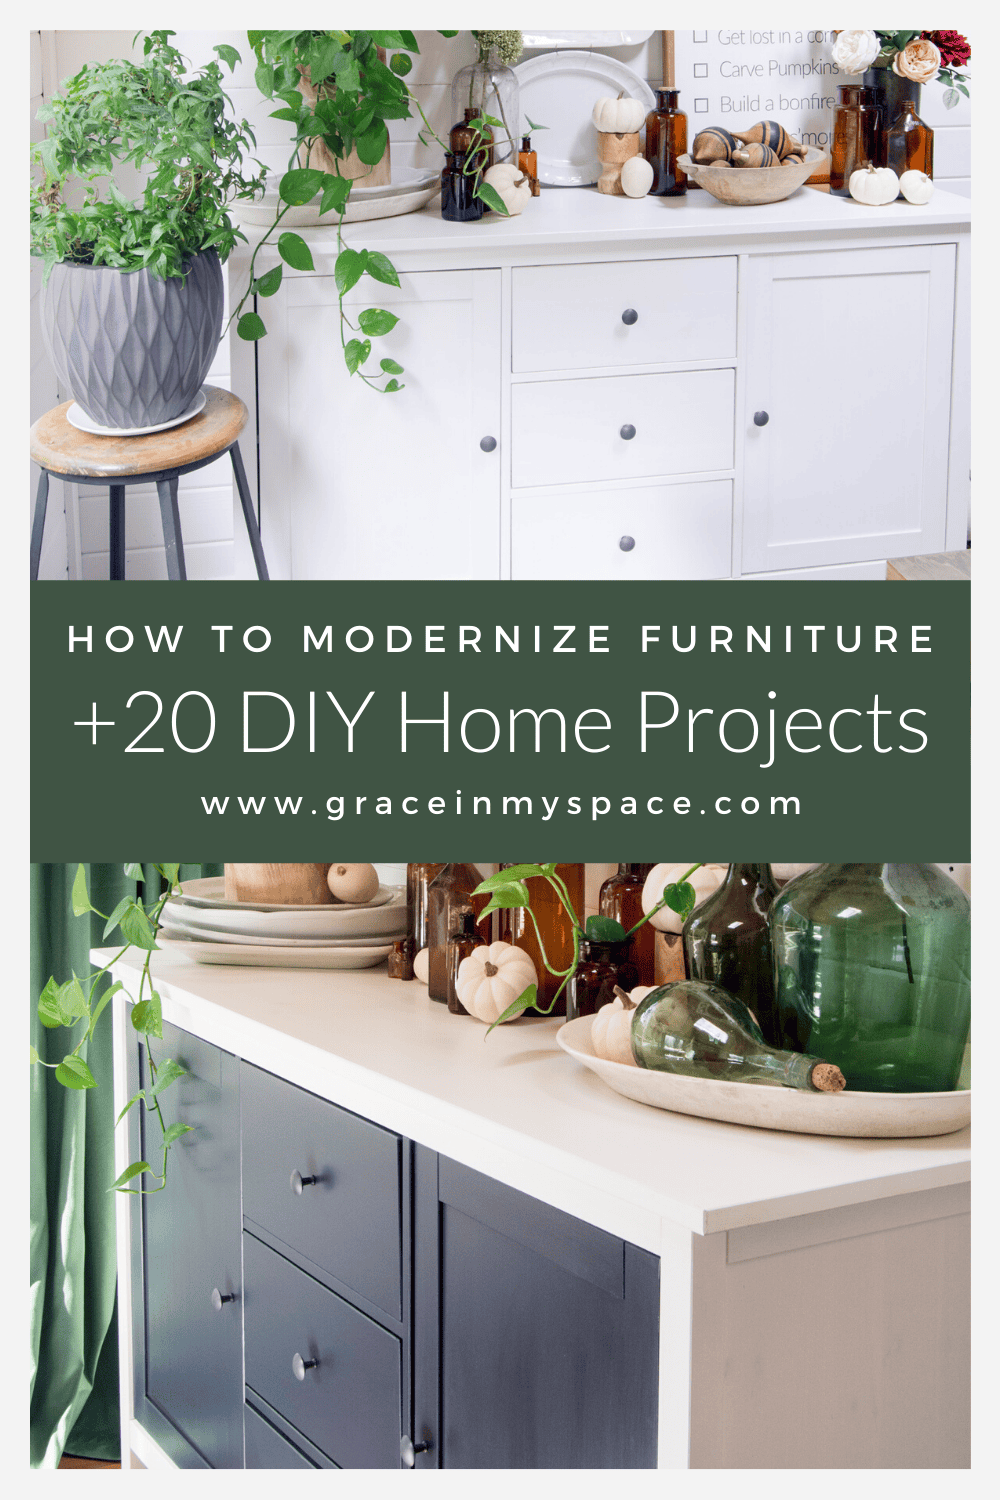 DIY home projects with paint.